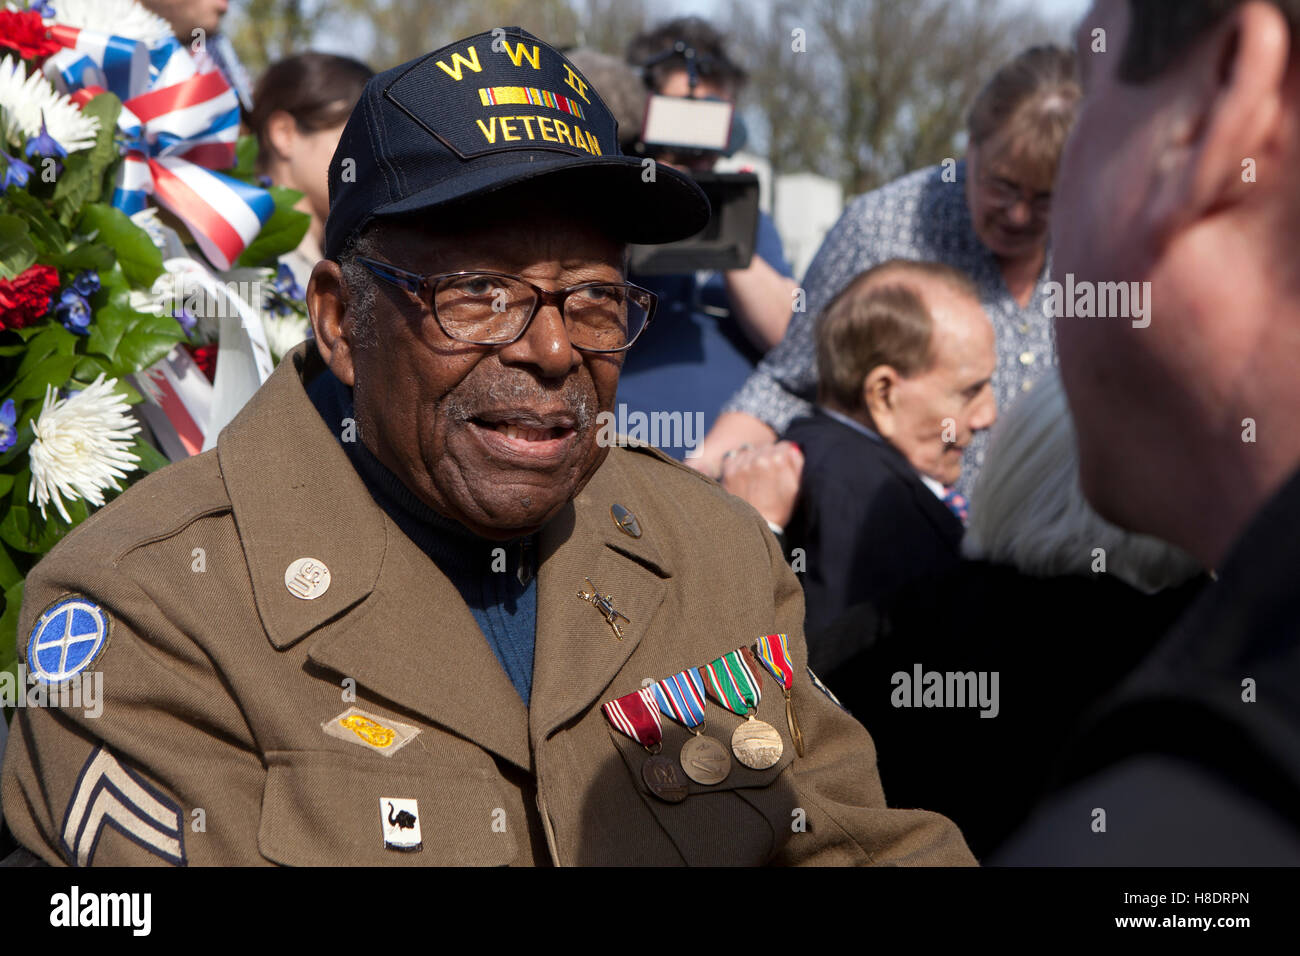 Washington, DC USA, 11th, November 2016: World War II Veterans and families gather at National World War II Memorial to remember and honor those who served in battle for Veterans Day. Credit:  B Christopher/Alamy Live News Stock Photo